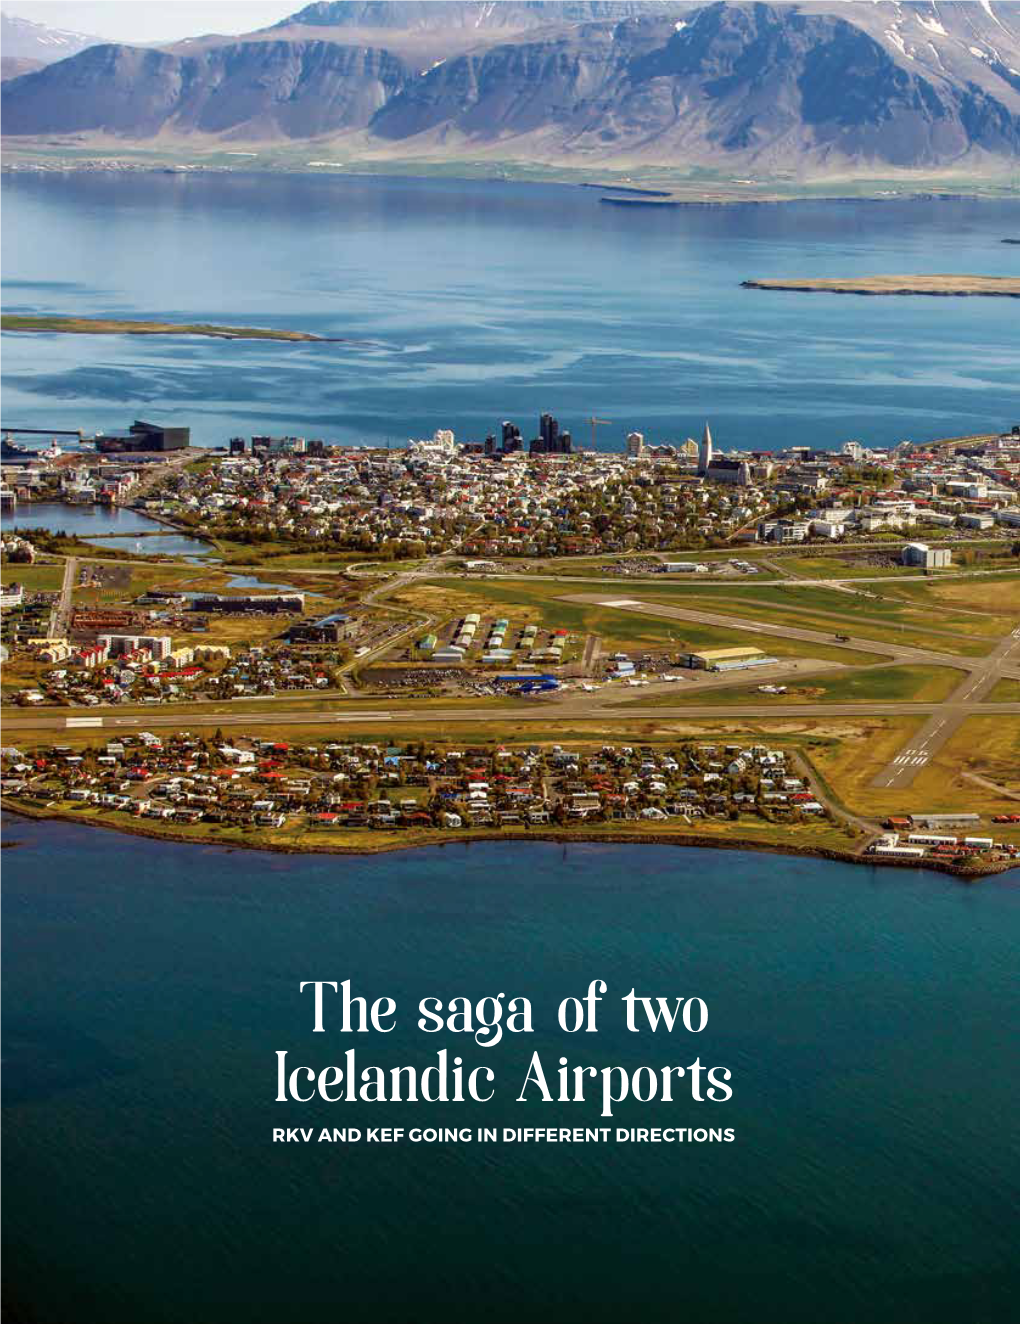 The Saga of Two Icelandic Airports RKV and KEF GOING in DIFFERENT DIRECTIONS